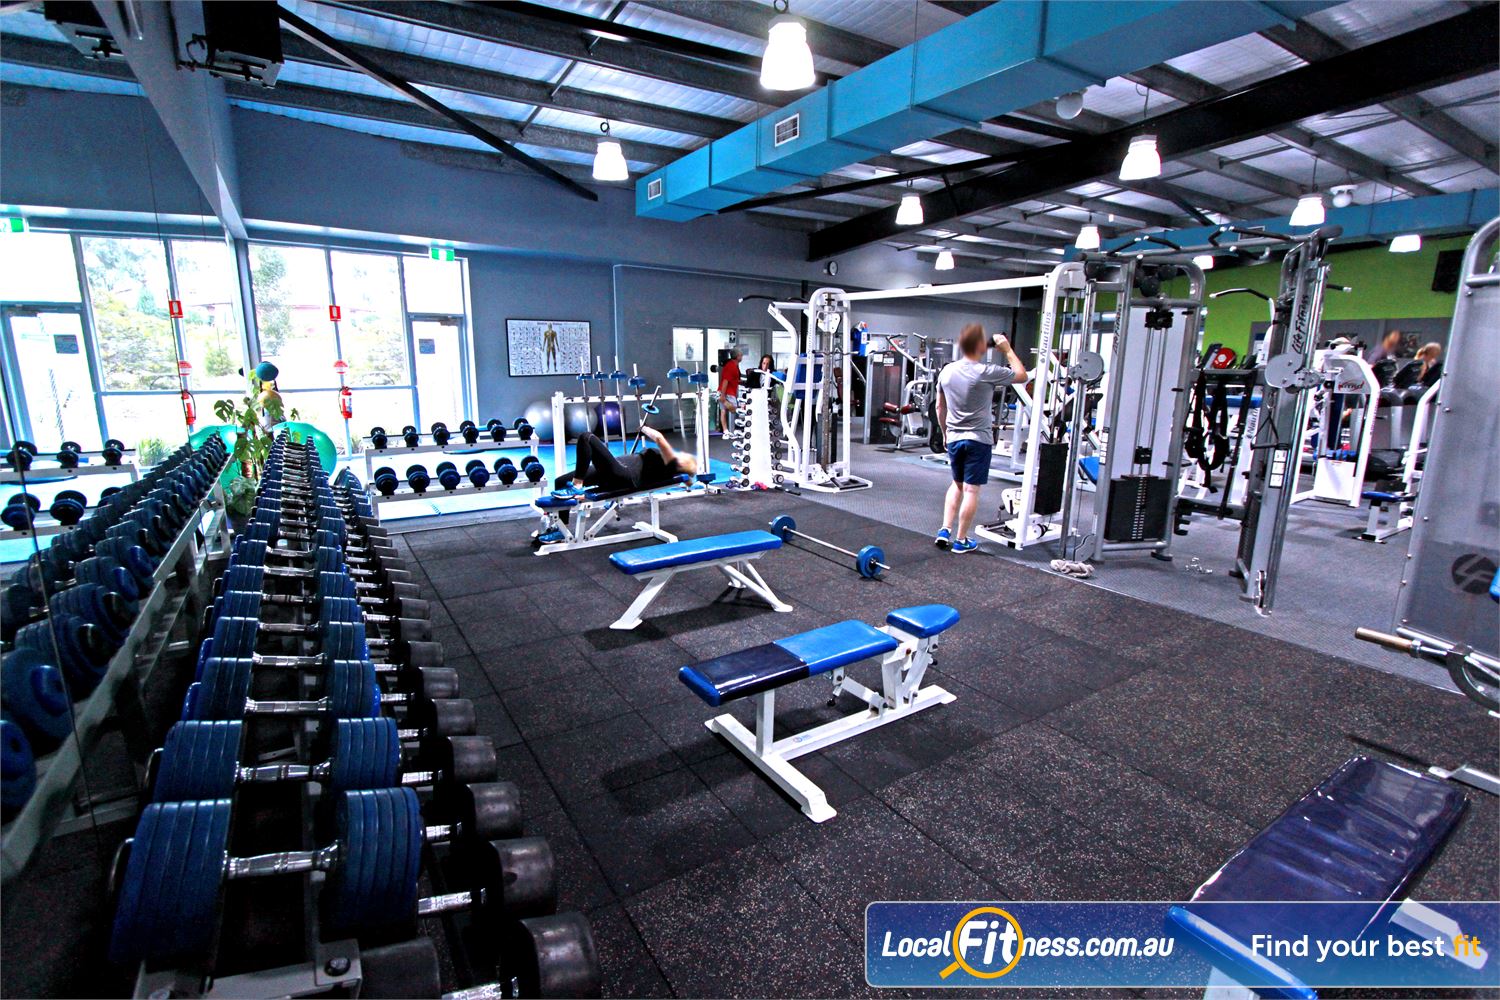 1664_47120_knox-leisureworks-boronia-gym-fitness-our-boronia-gym-includes-a-fully-equipped-free-weights_xl